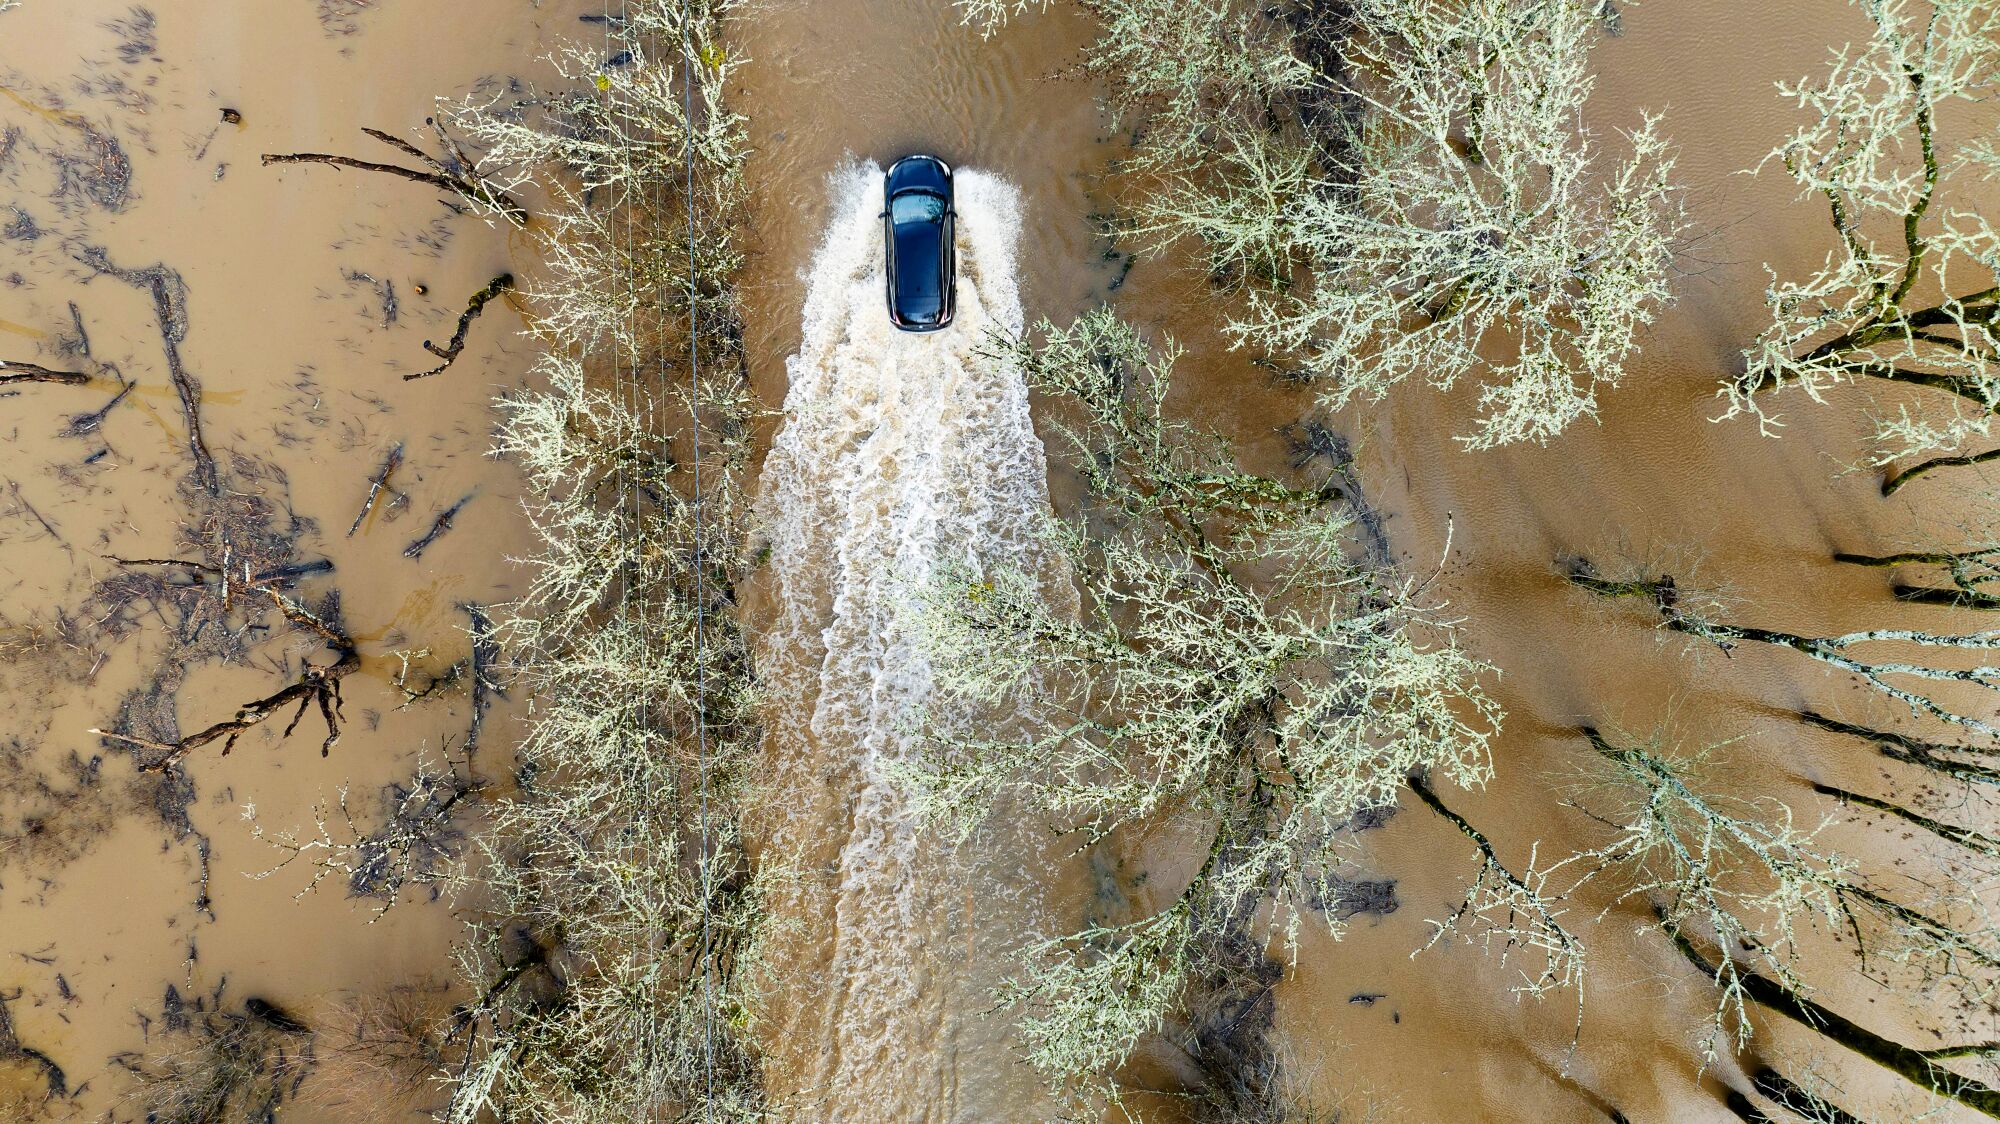 The car drives through murky waters on a flooded road surrounded by fields and forests.